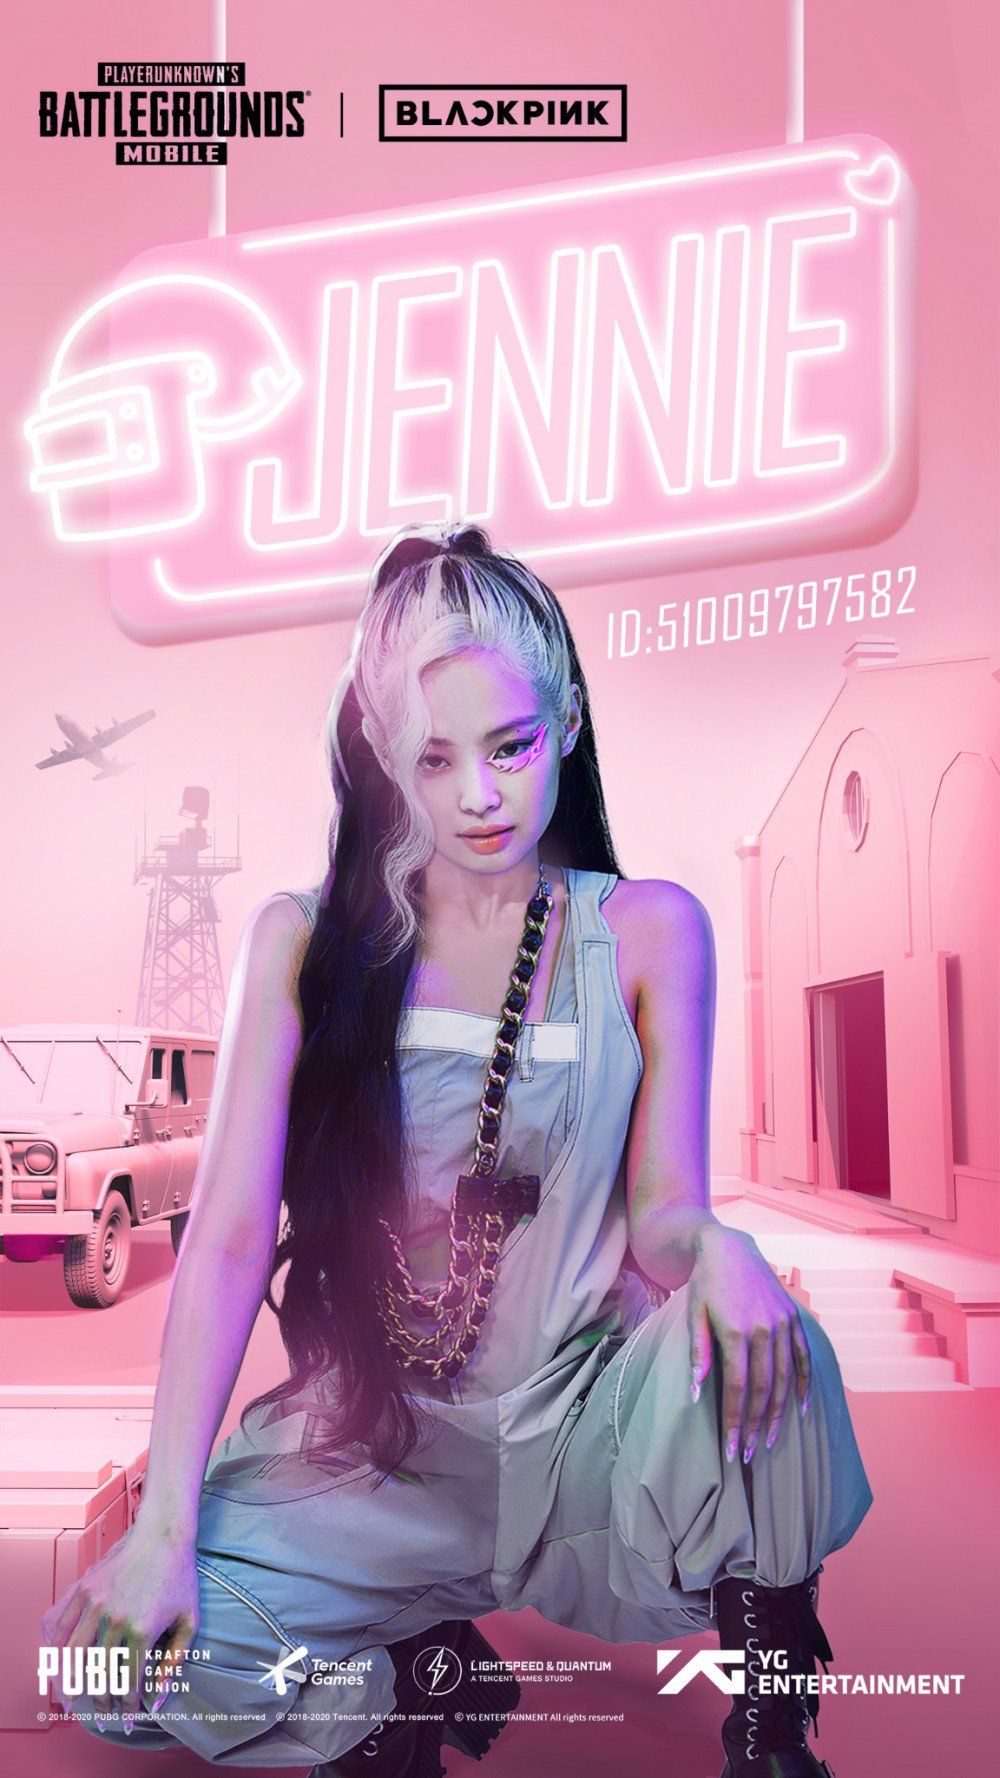 BLACKPINK SERVES on their promotional posters for PUBG!